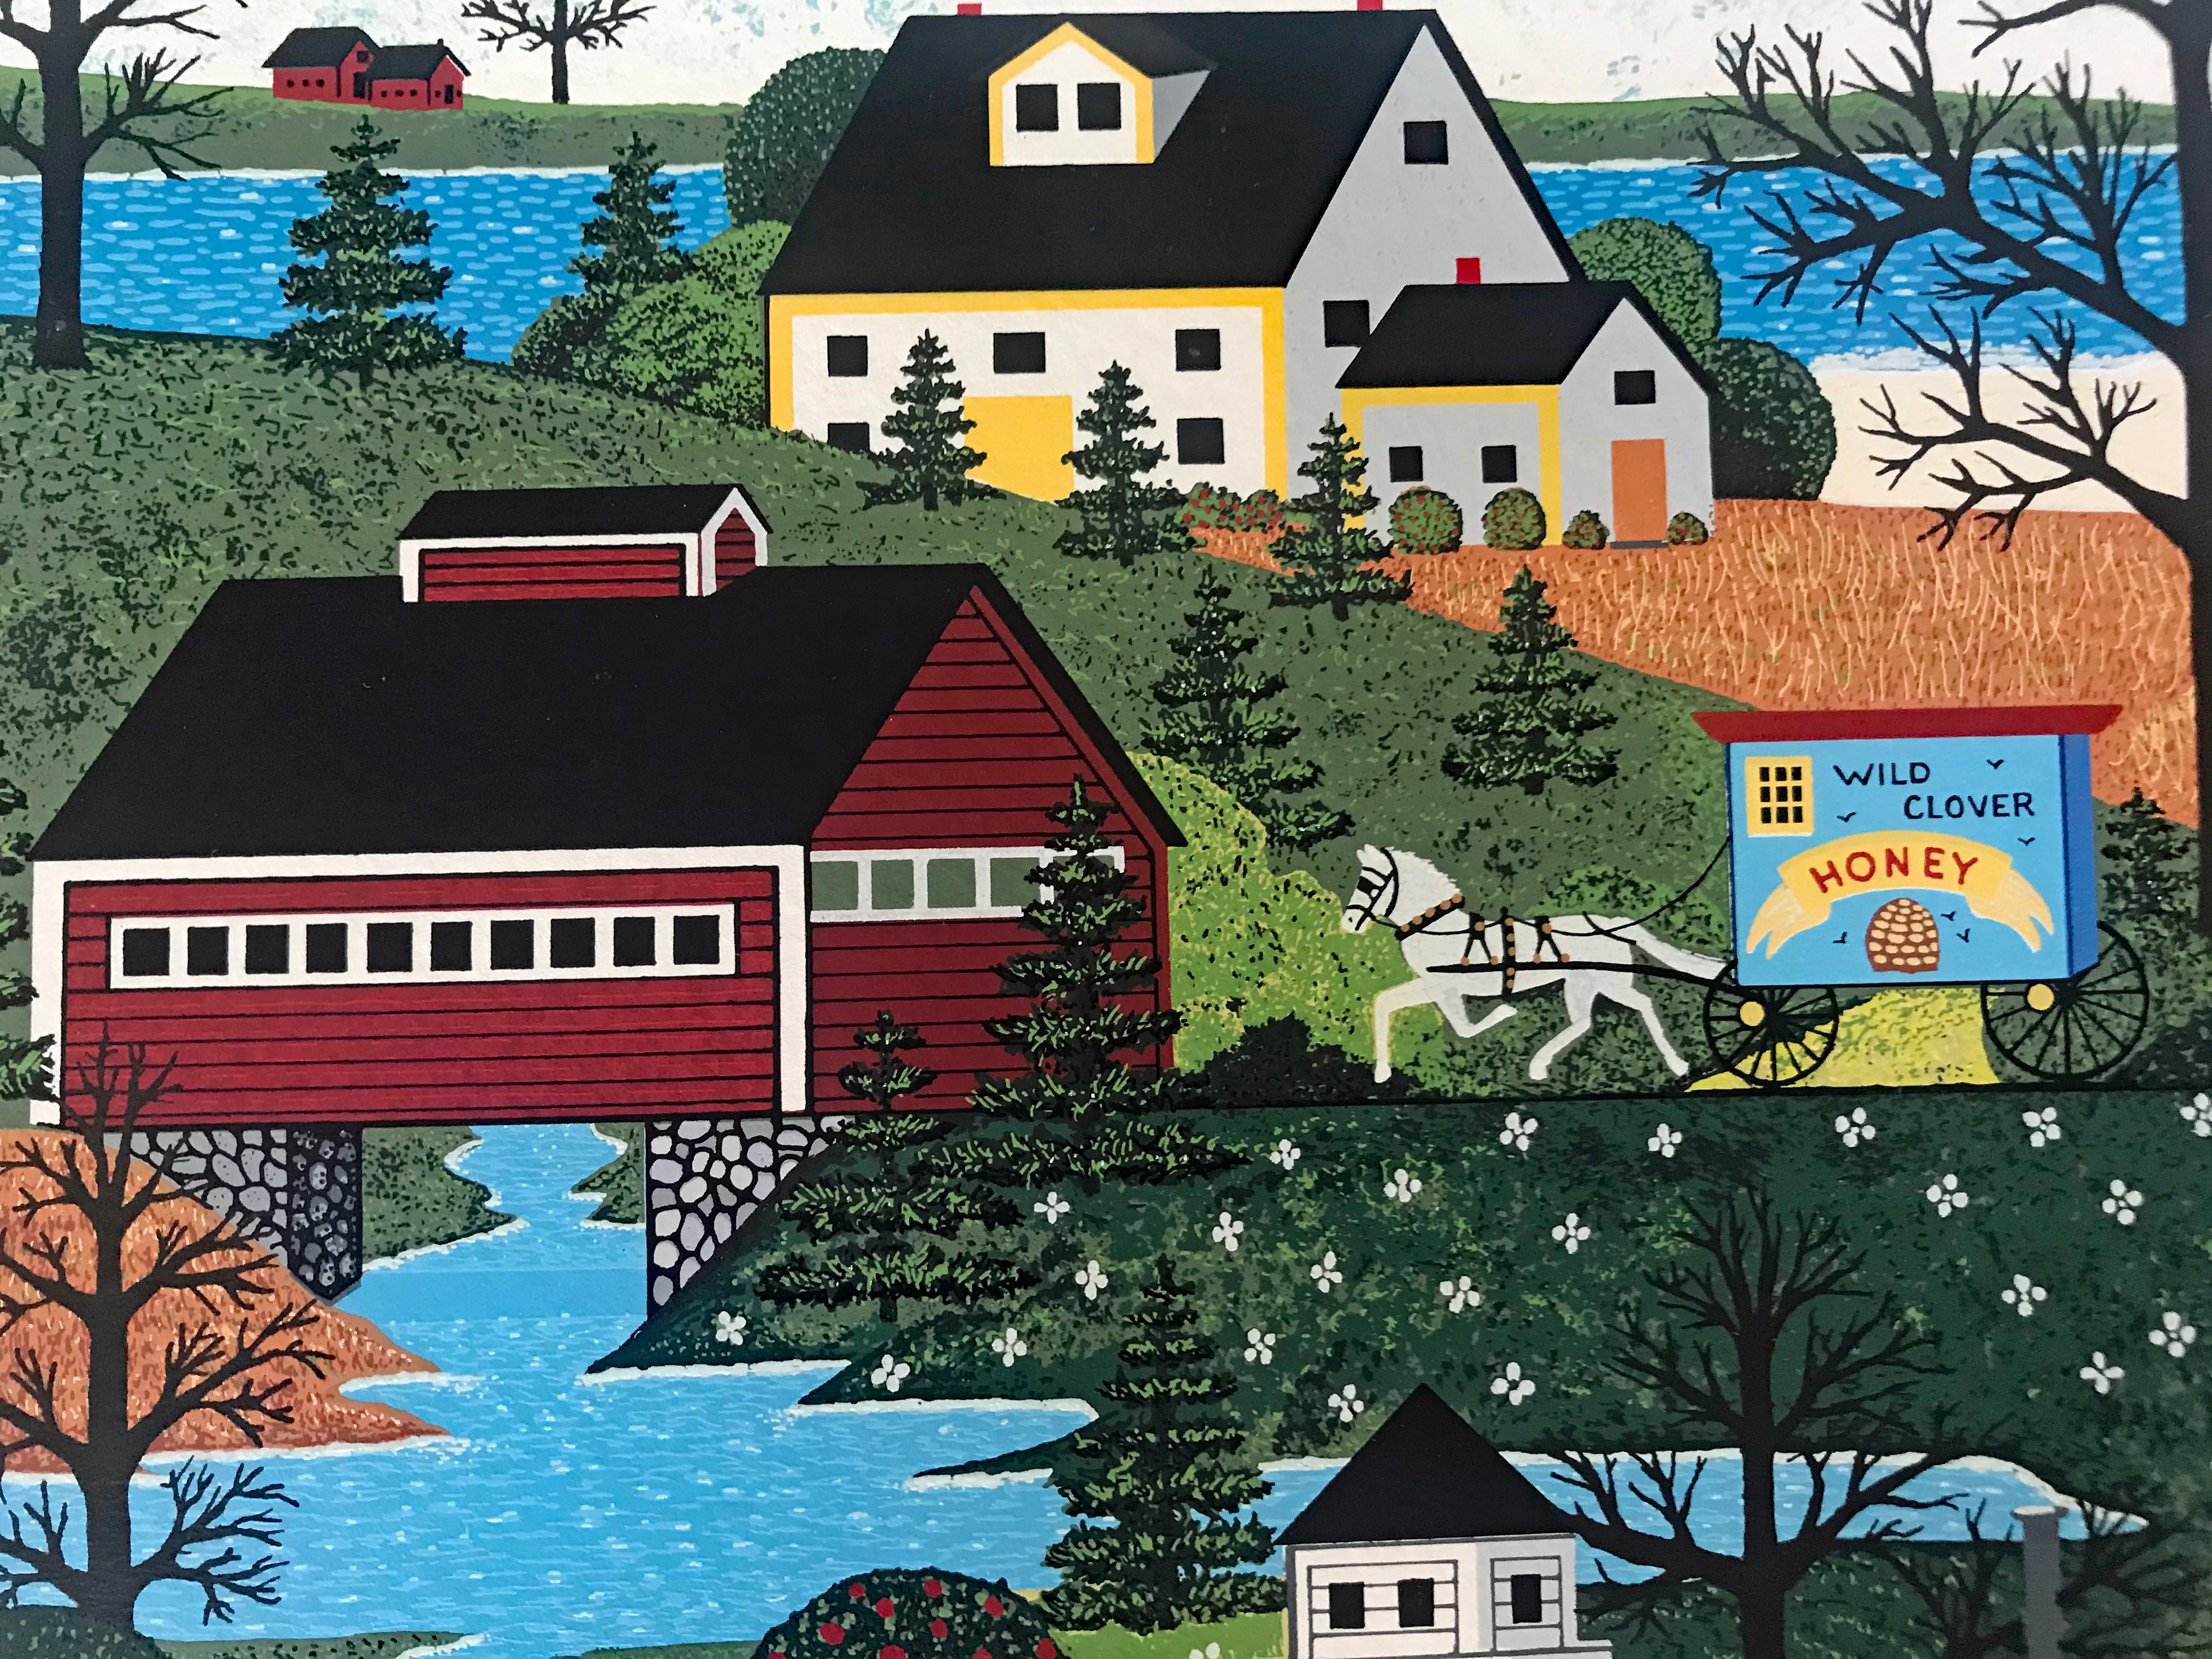 Sunday in New England Jane Wooster Scott Serigraph Print Artist Hand Signed and Numbered